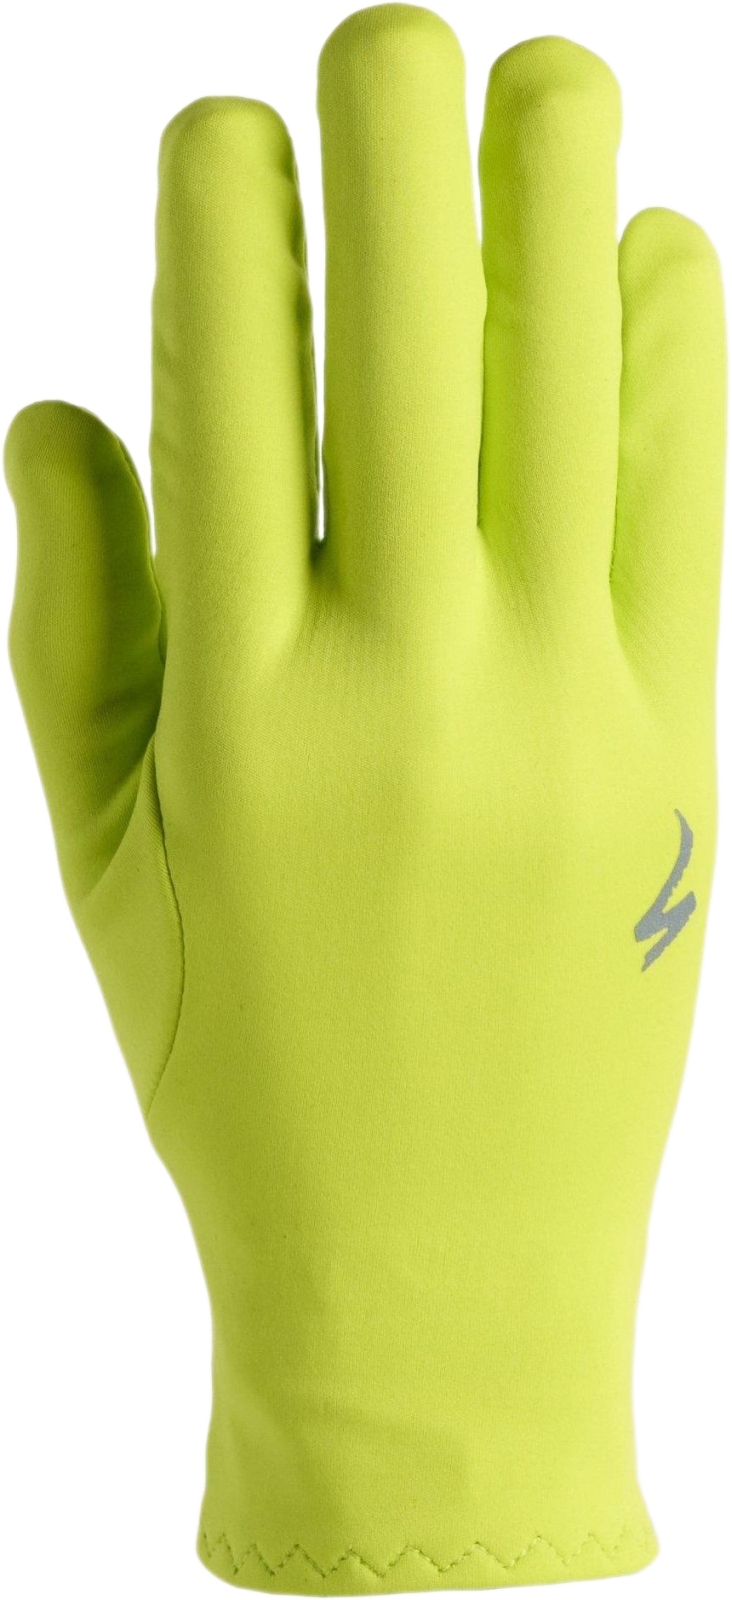 E-shop Specialized Men's Softshell Thermal Glove - hyper green L